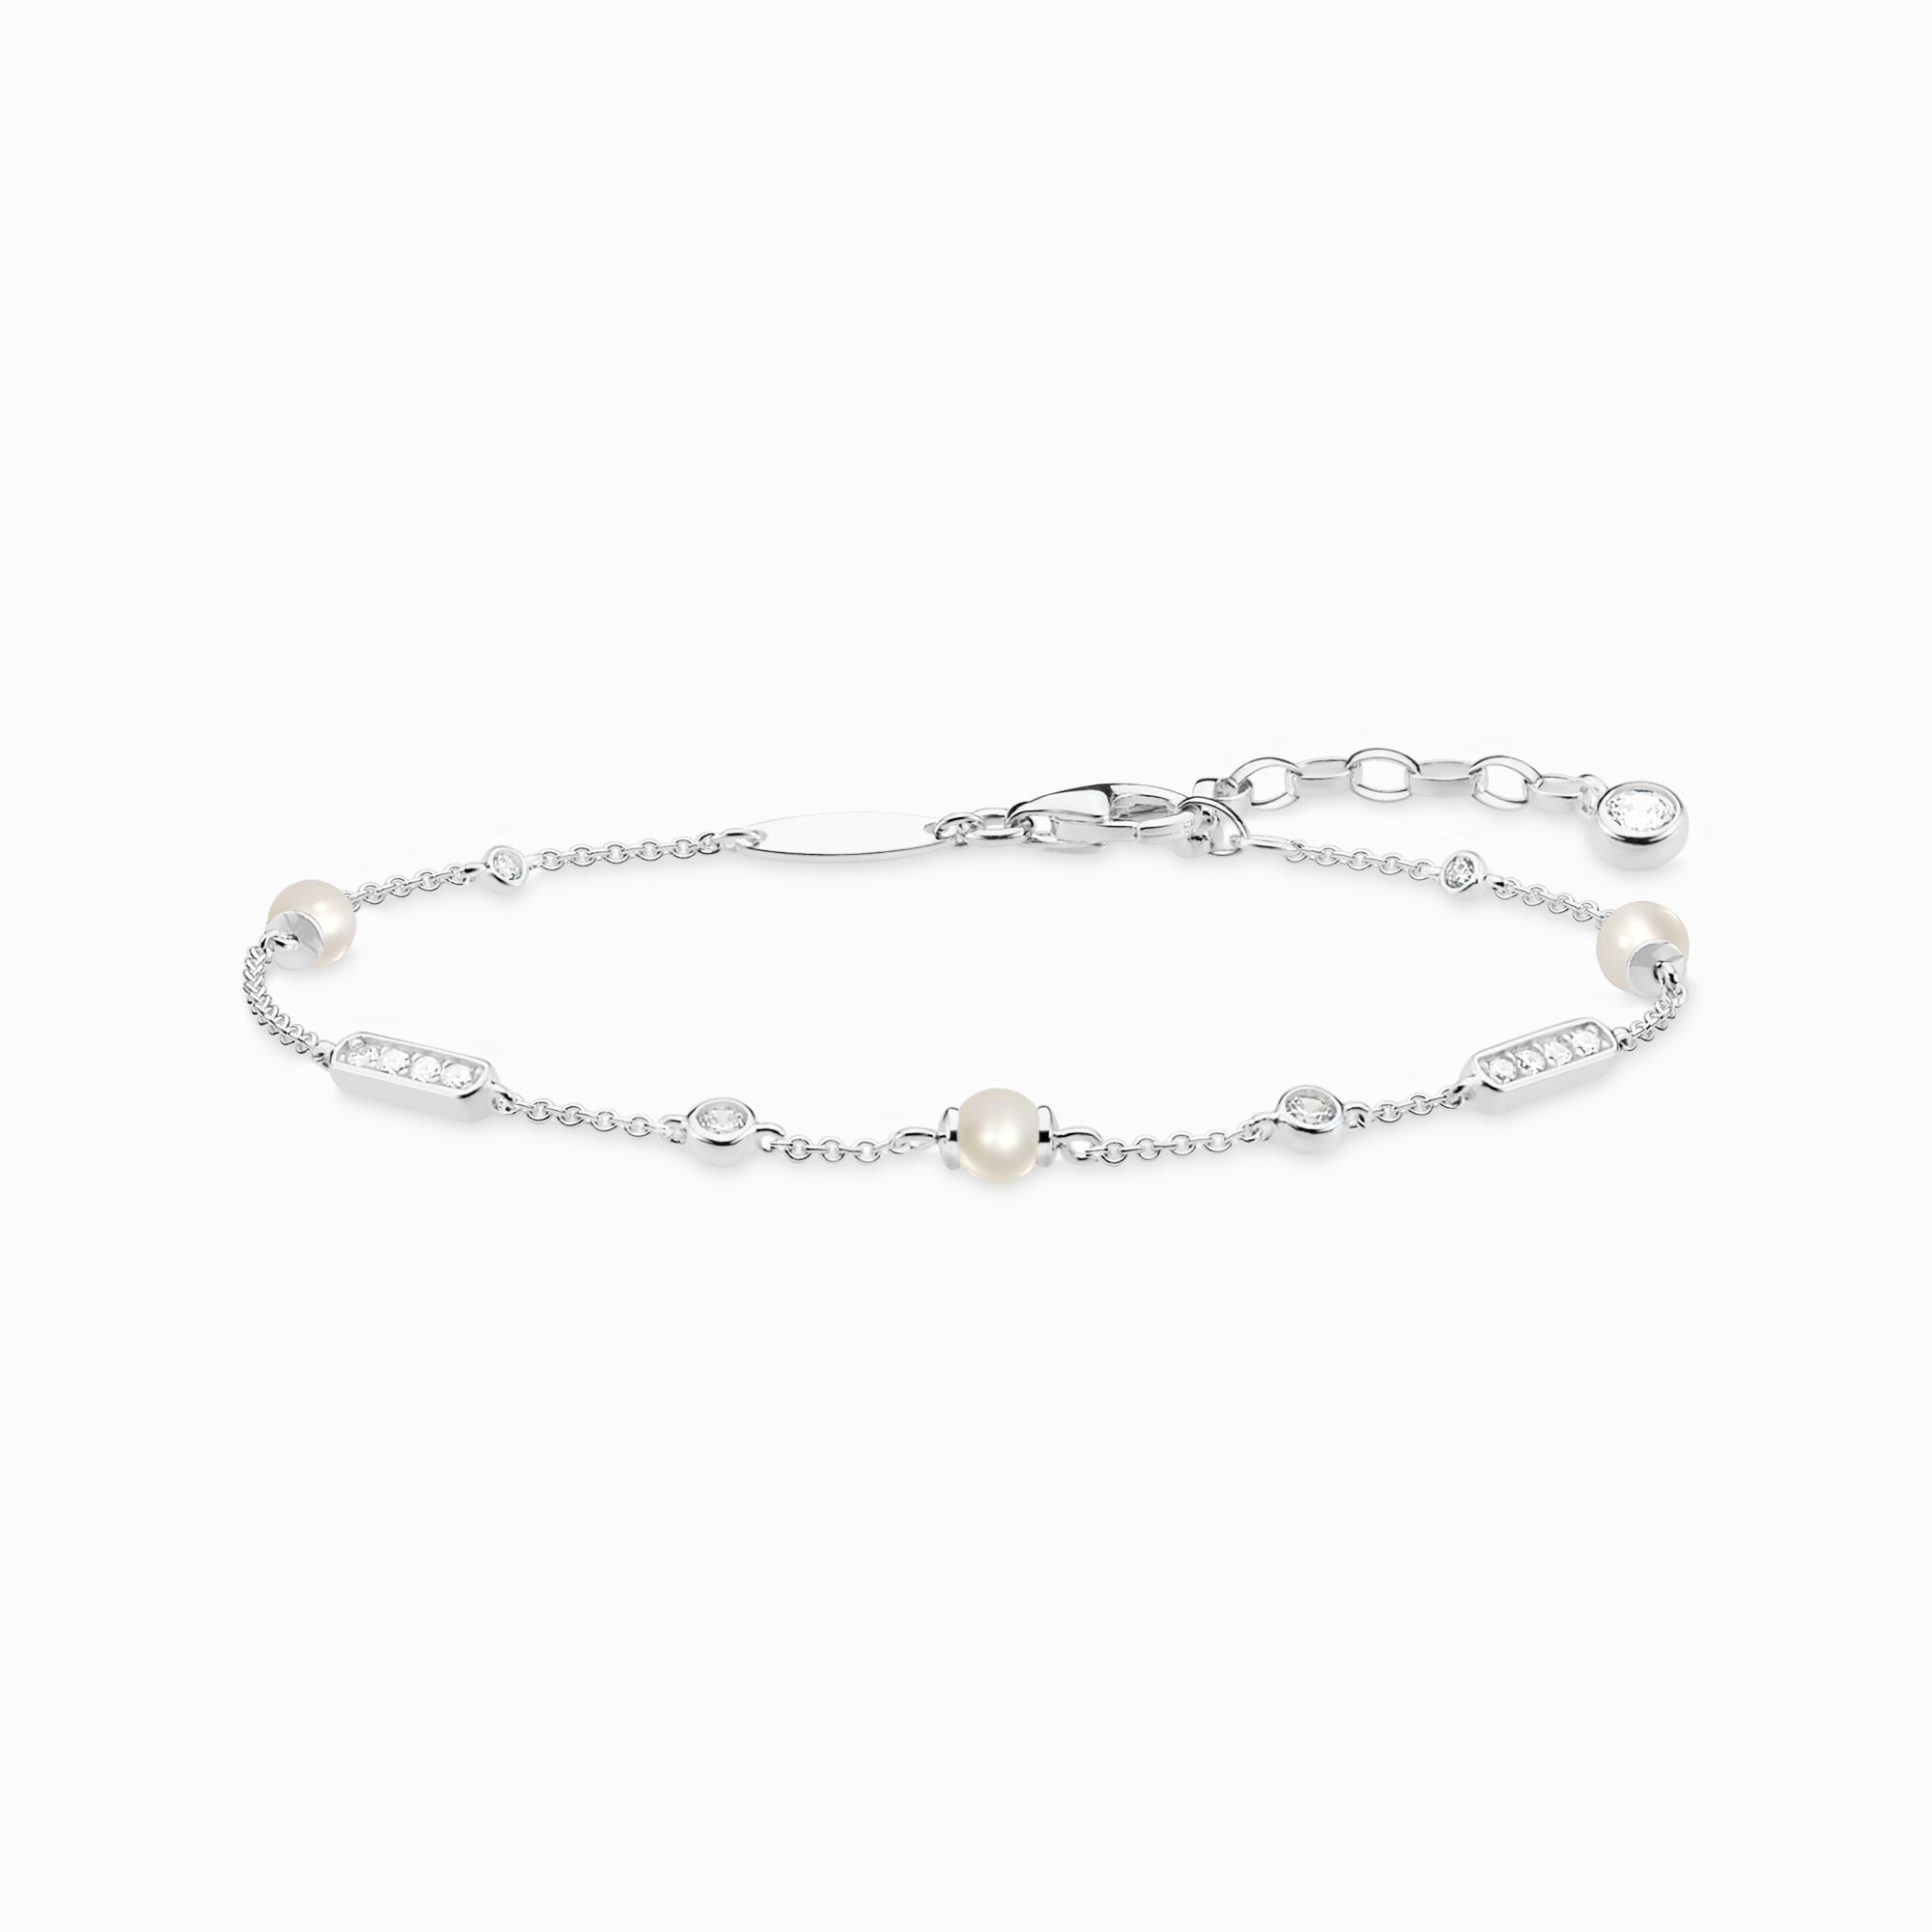 Bracelet with white pearls and white stones silver from the  collection in the THOMAS SABO online store